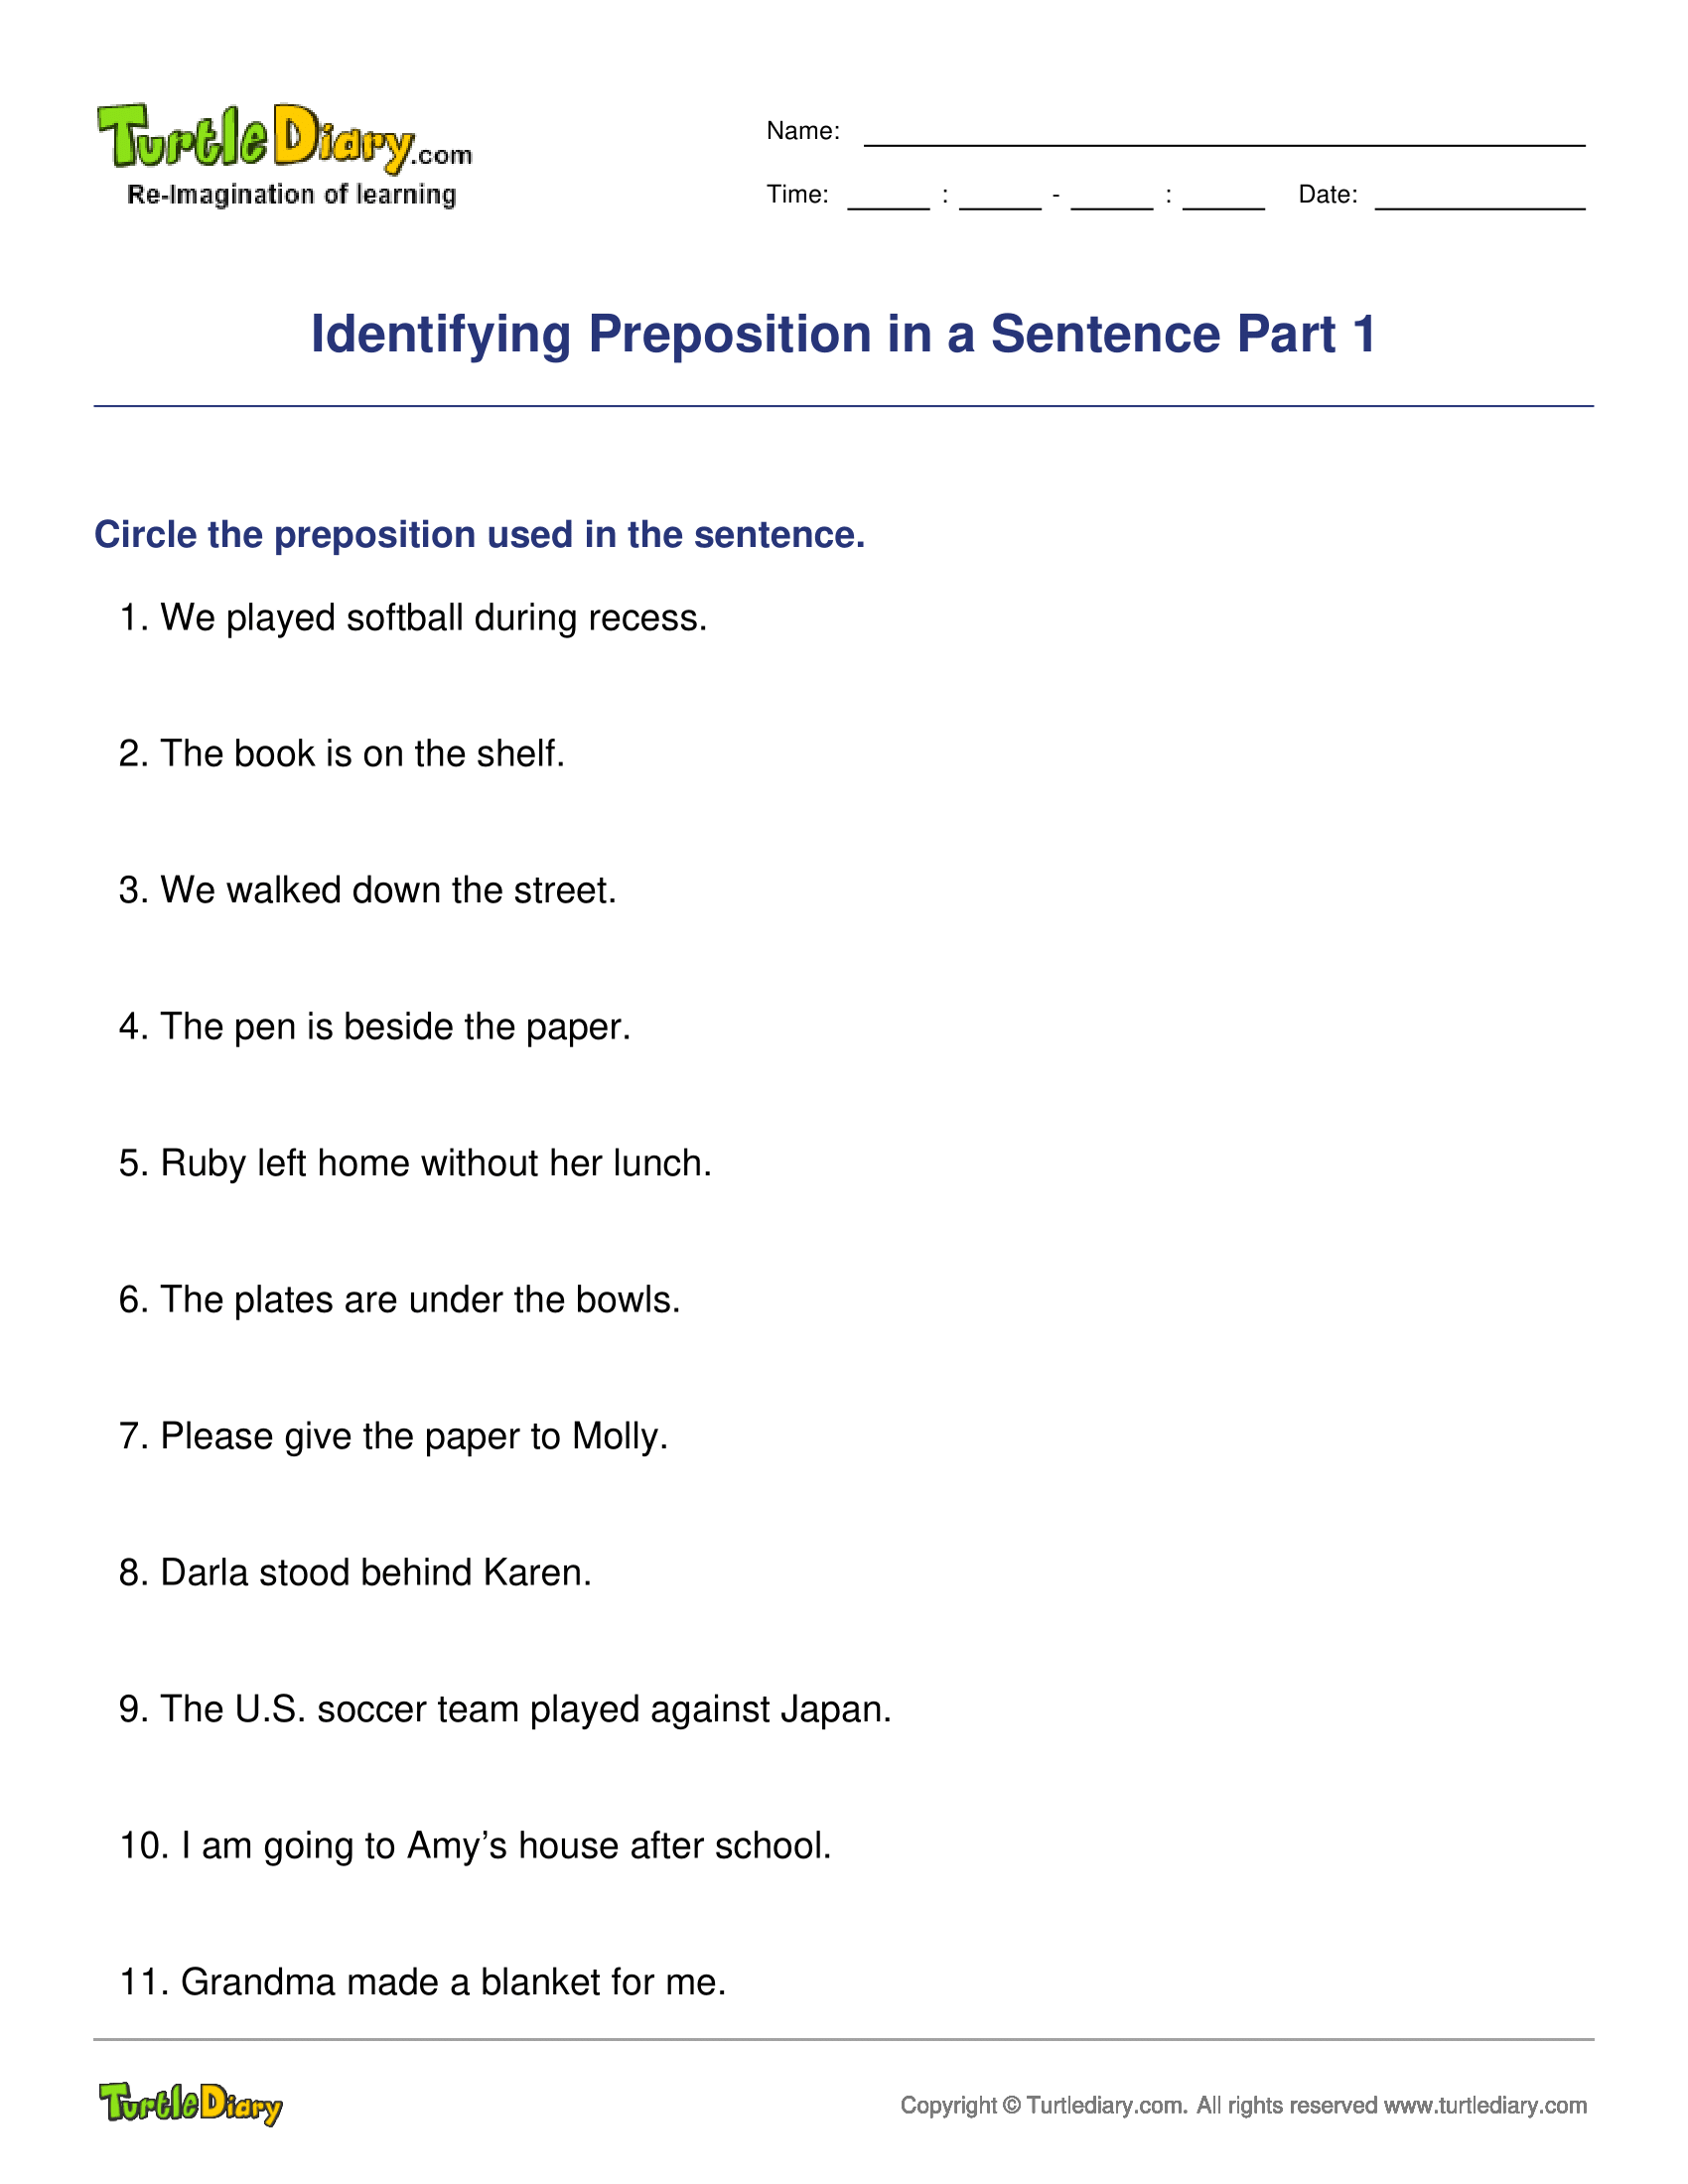 Identifying Preposition in a Sentence Part 1